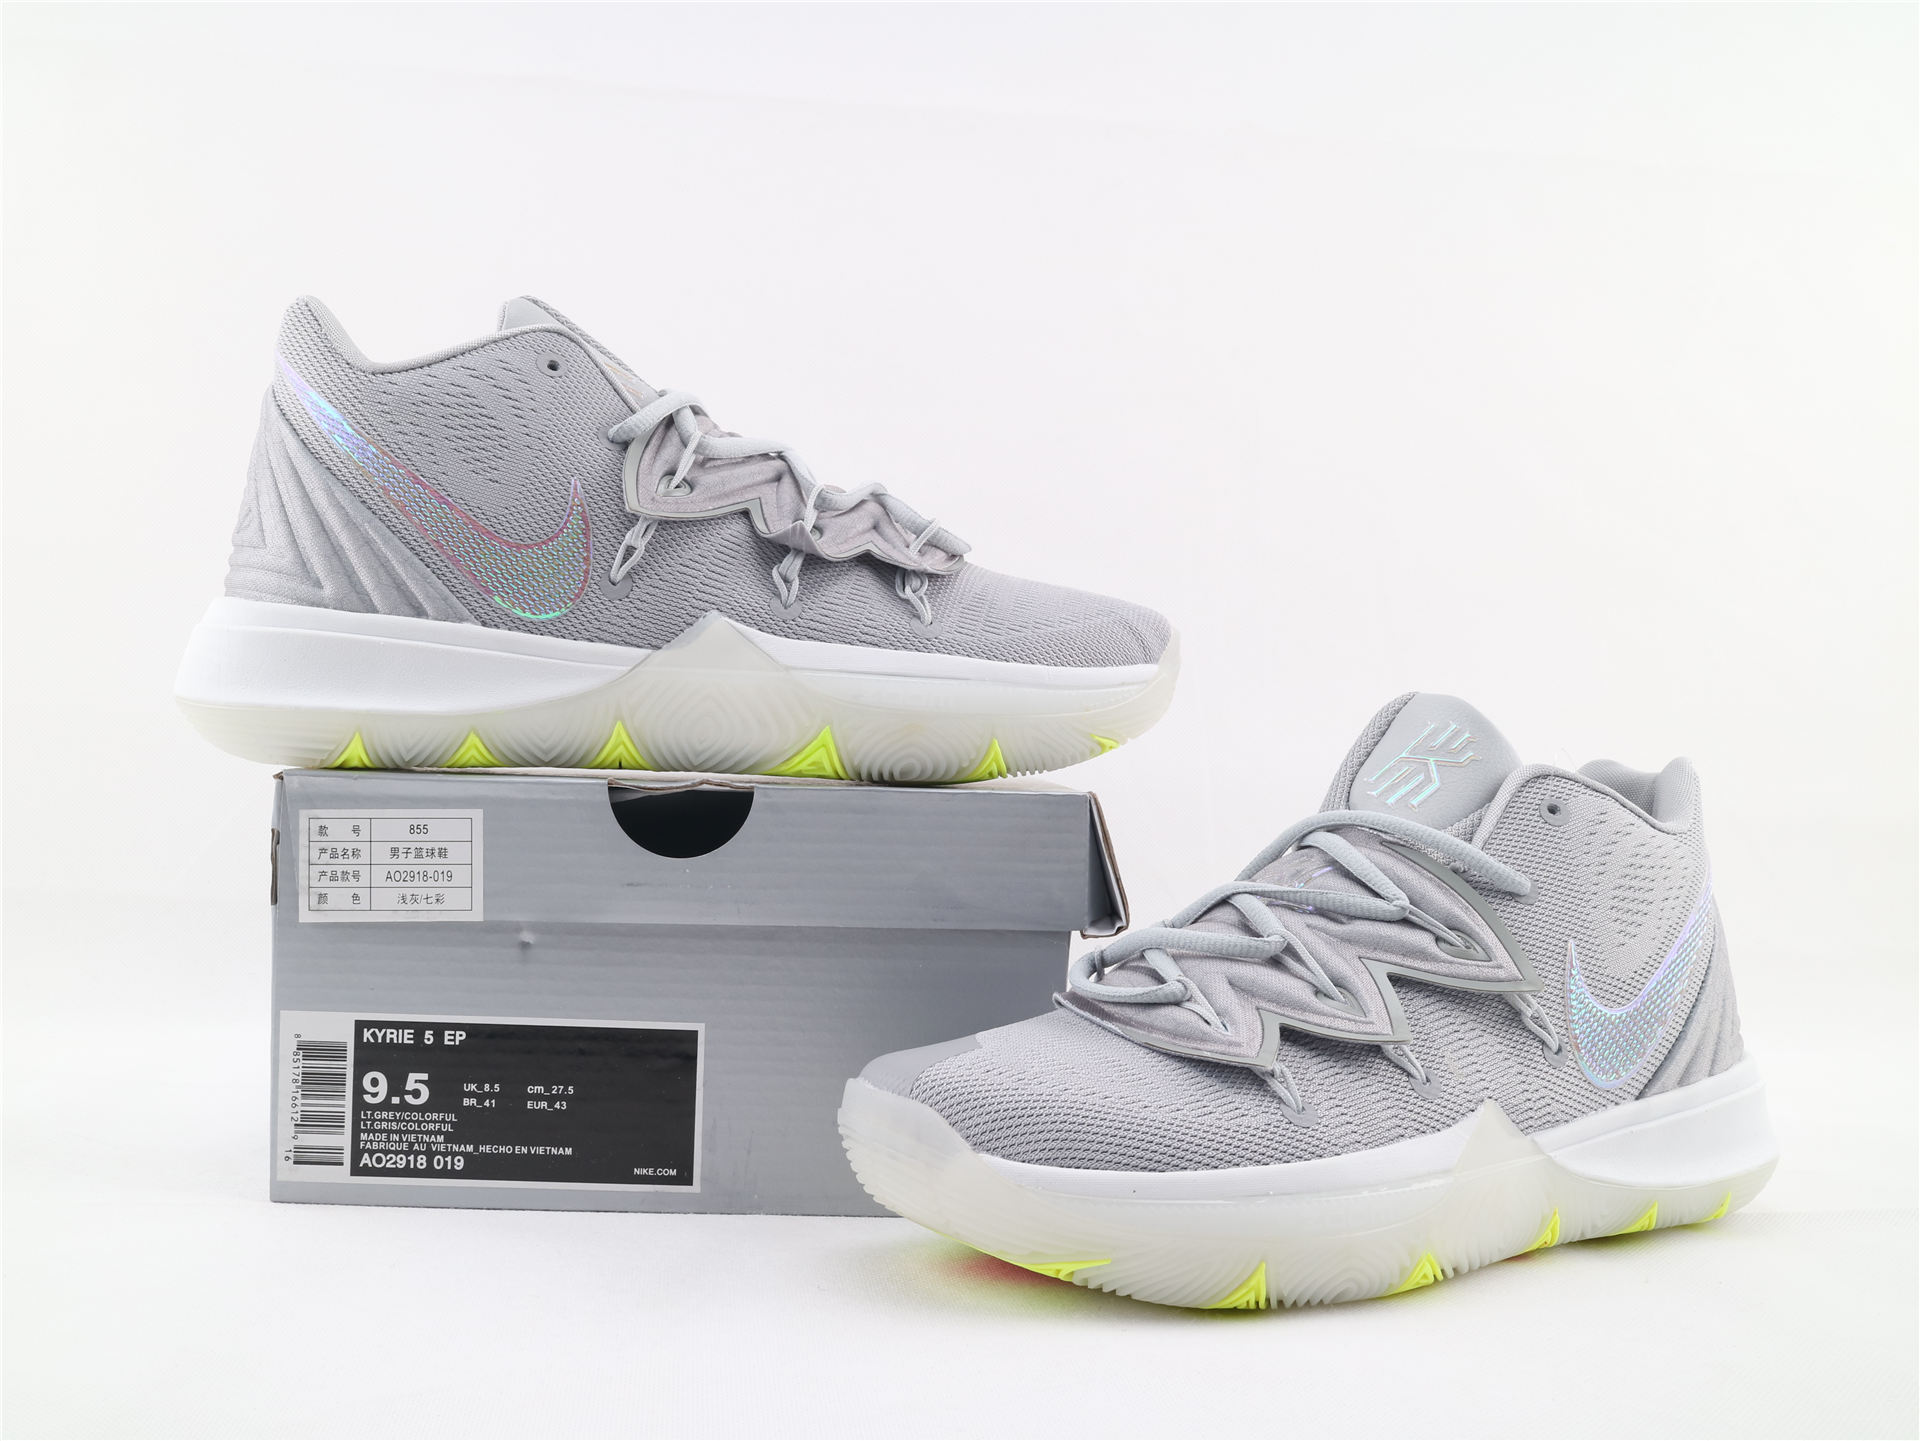 Nike Kyrie 5 Cool Grey/Laser On Sale 